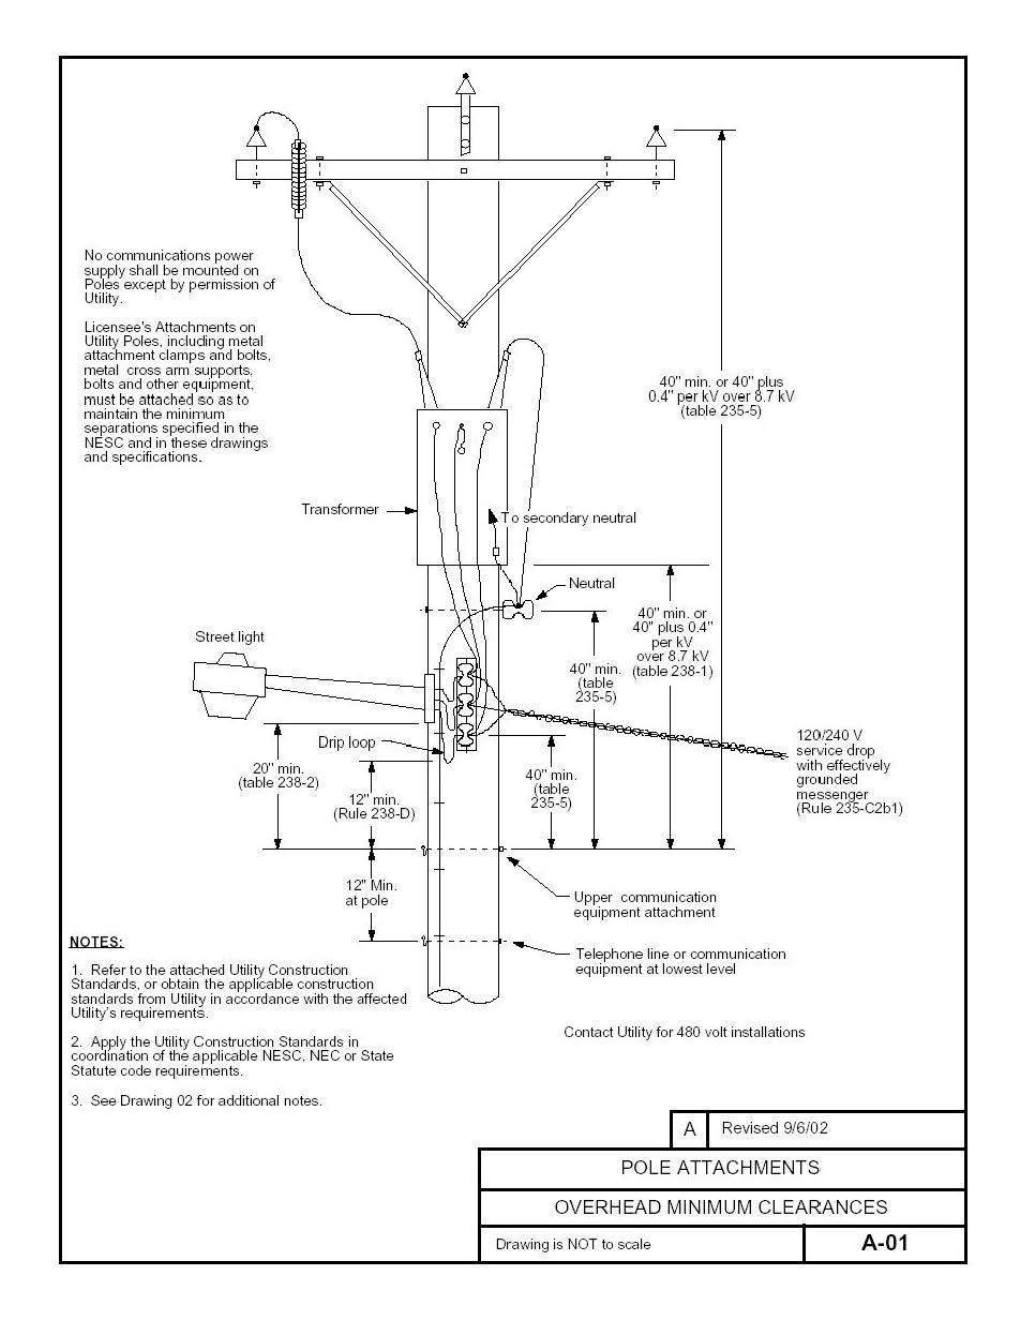 Pole Attachment Drawings A-01 to A-99